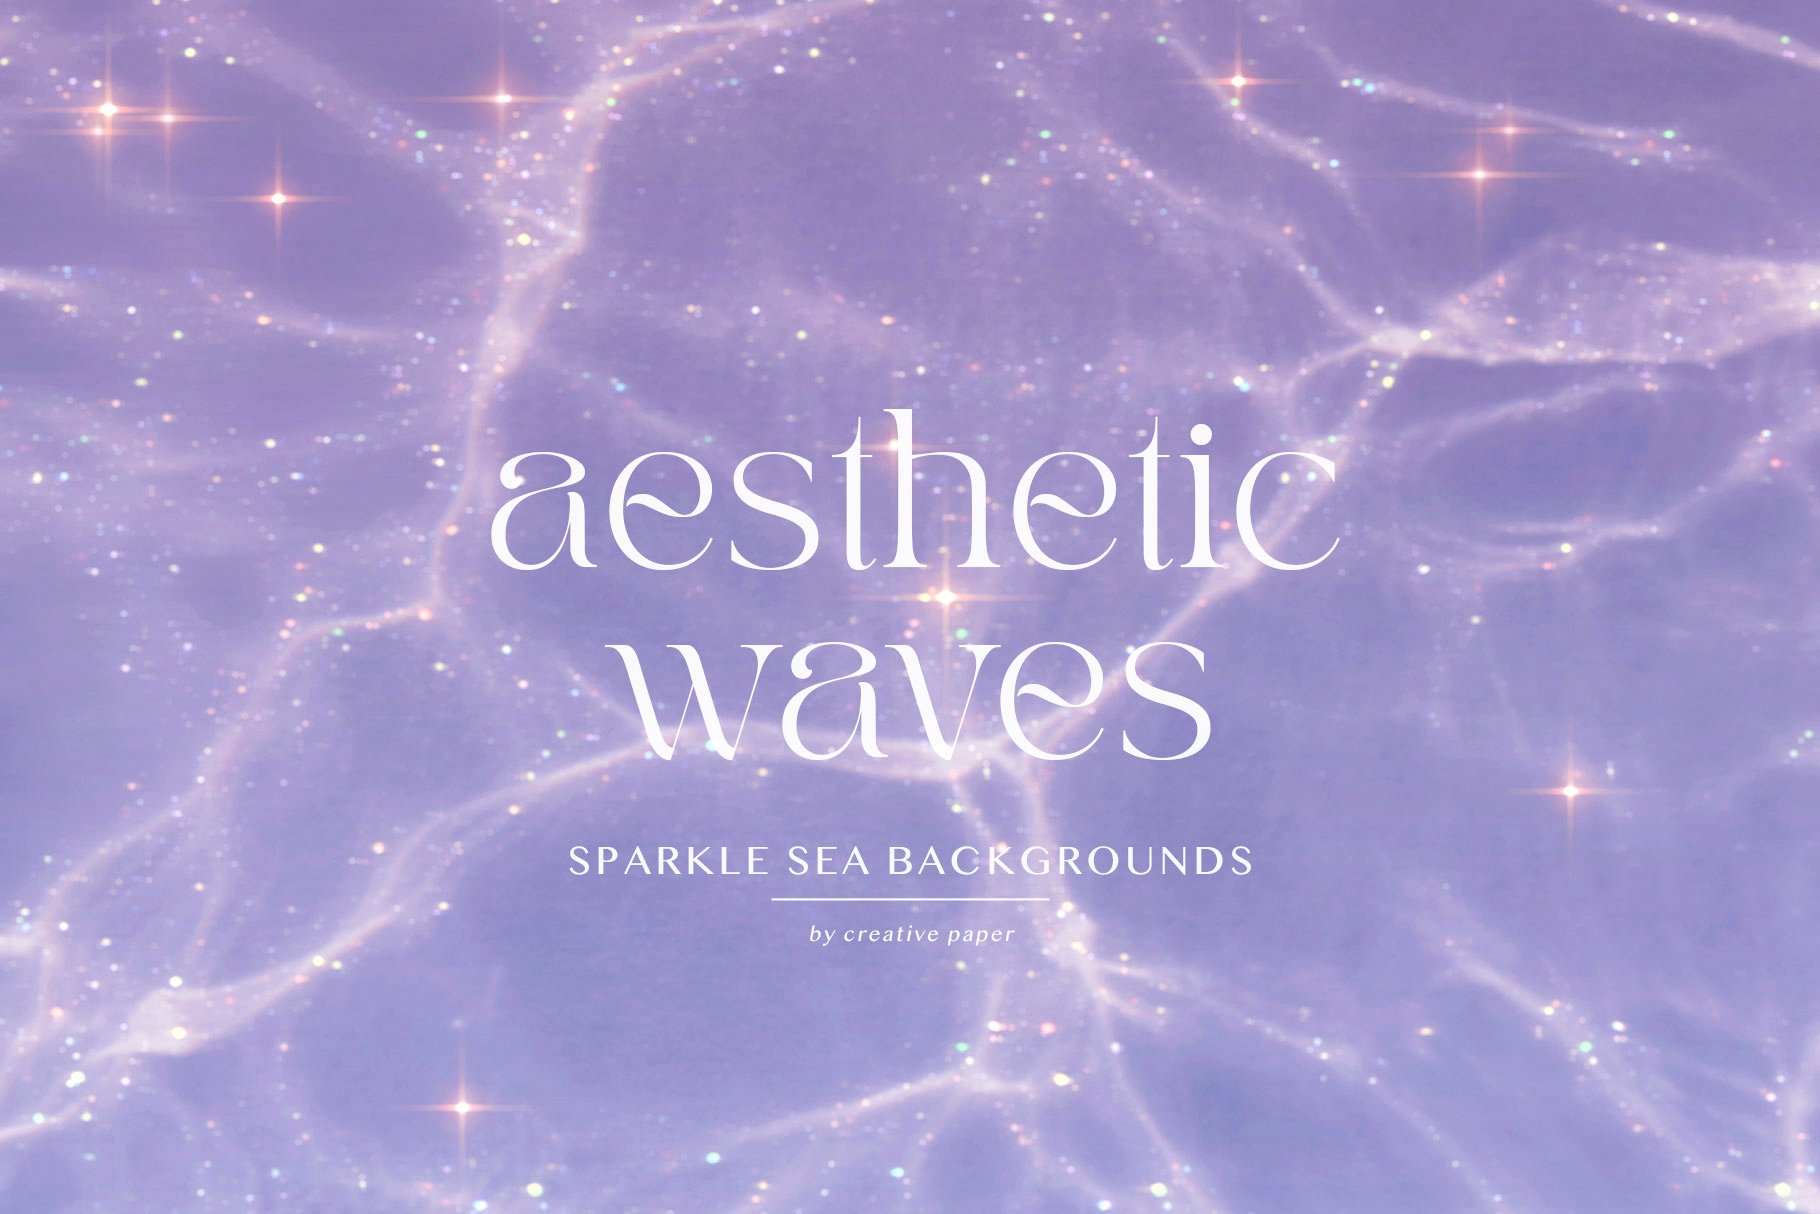 Aesthetic Waves + Water Texture cover image.